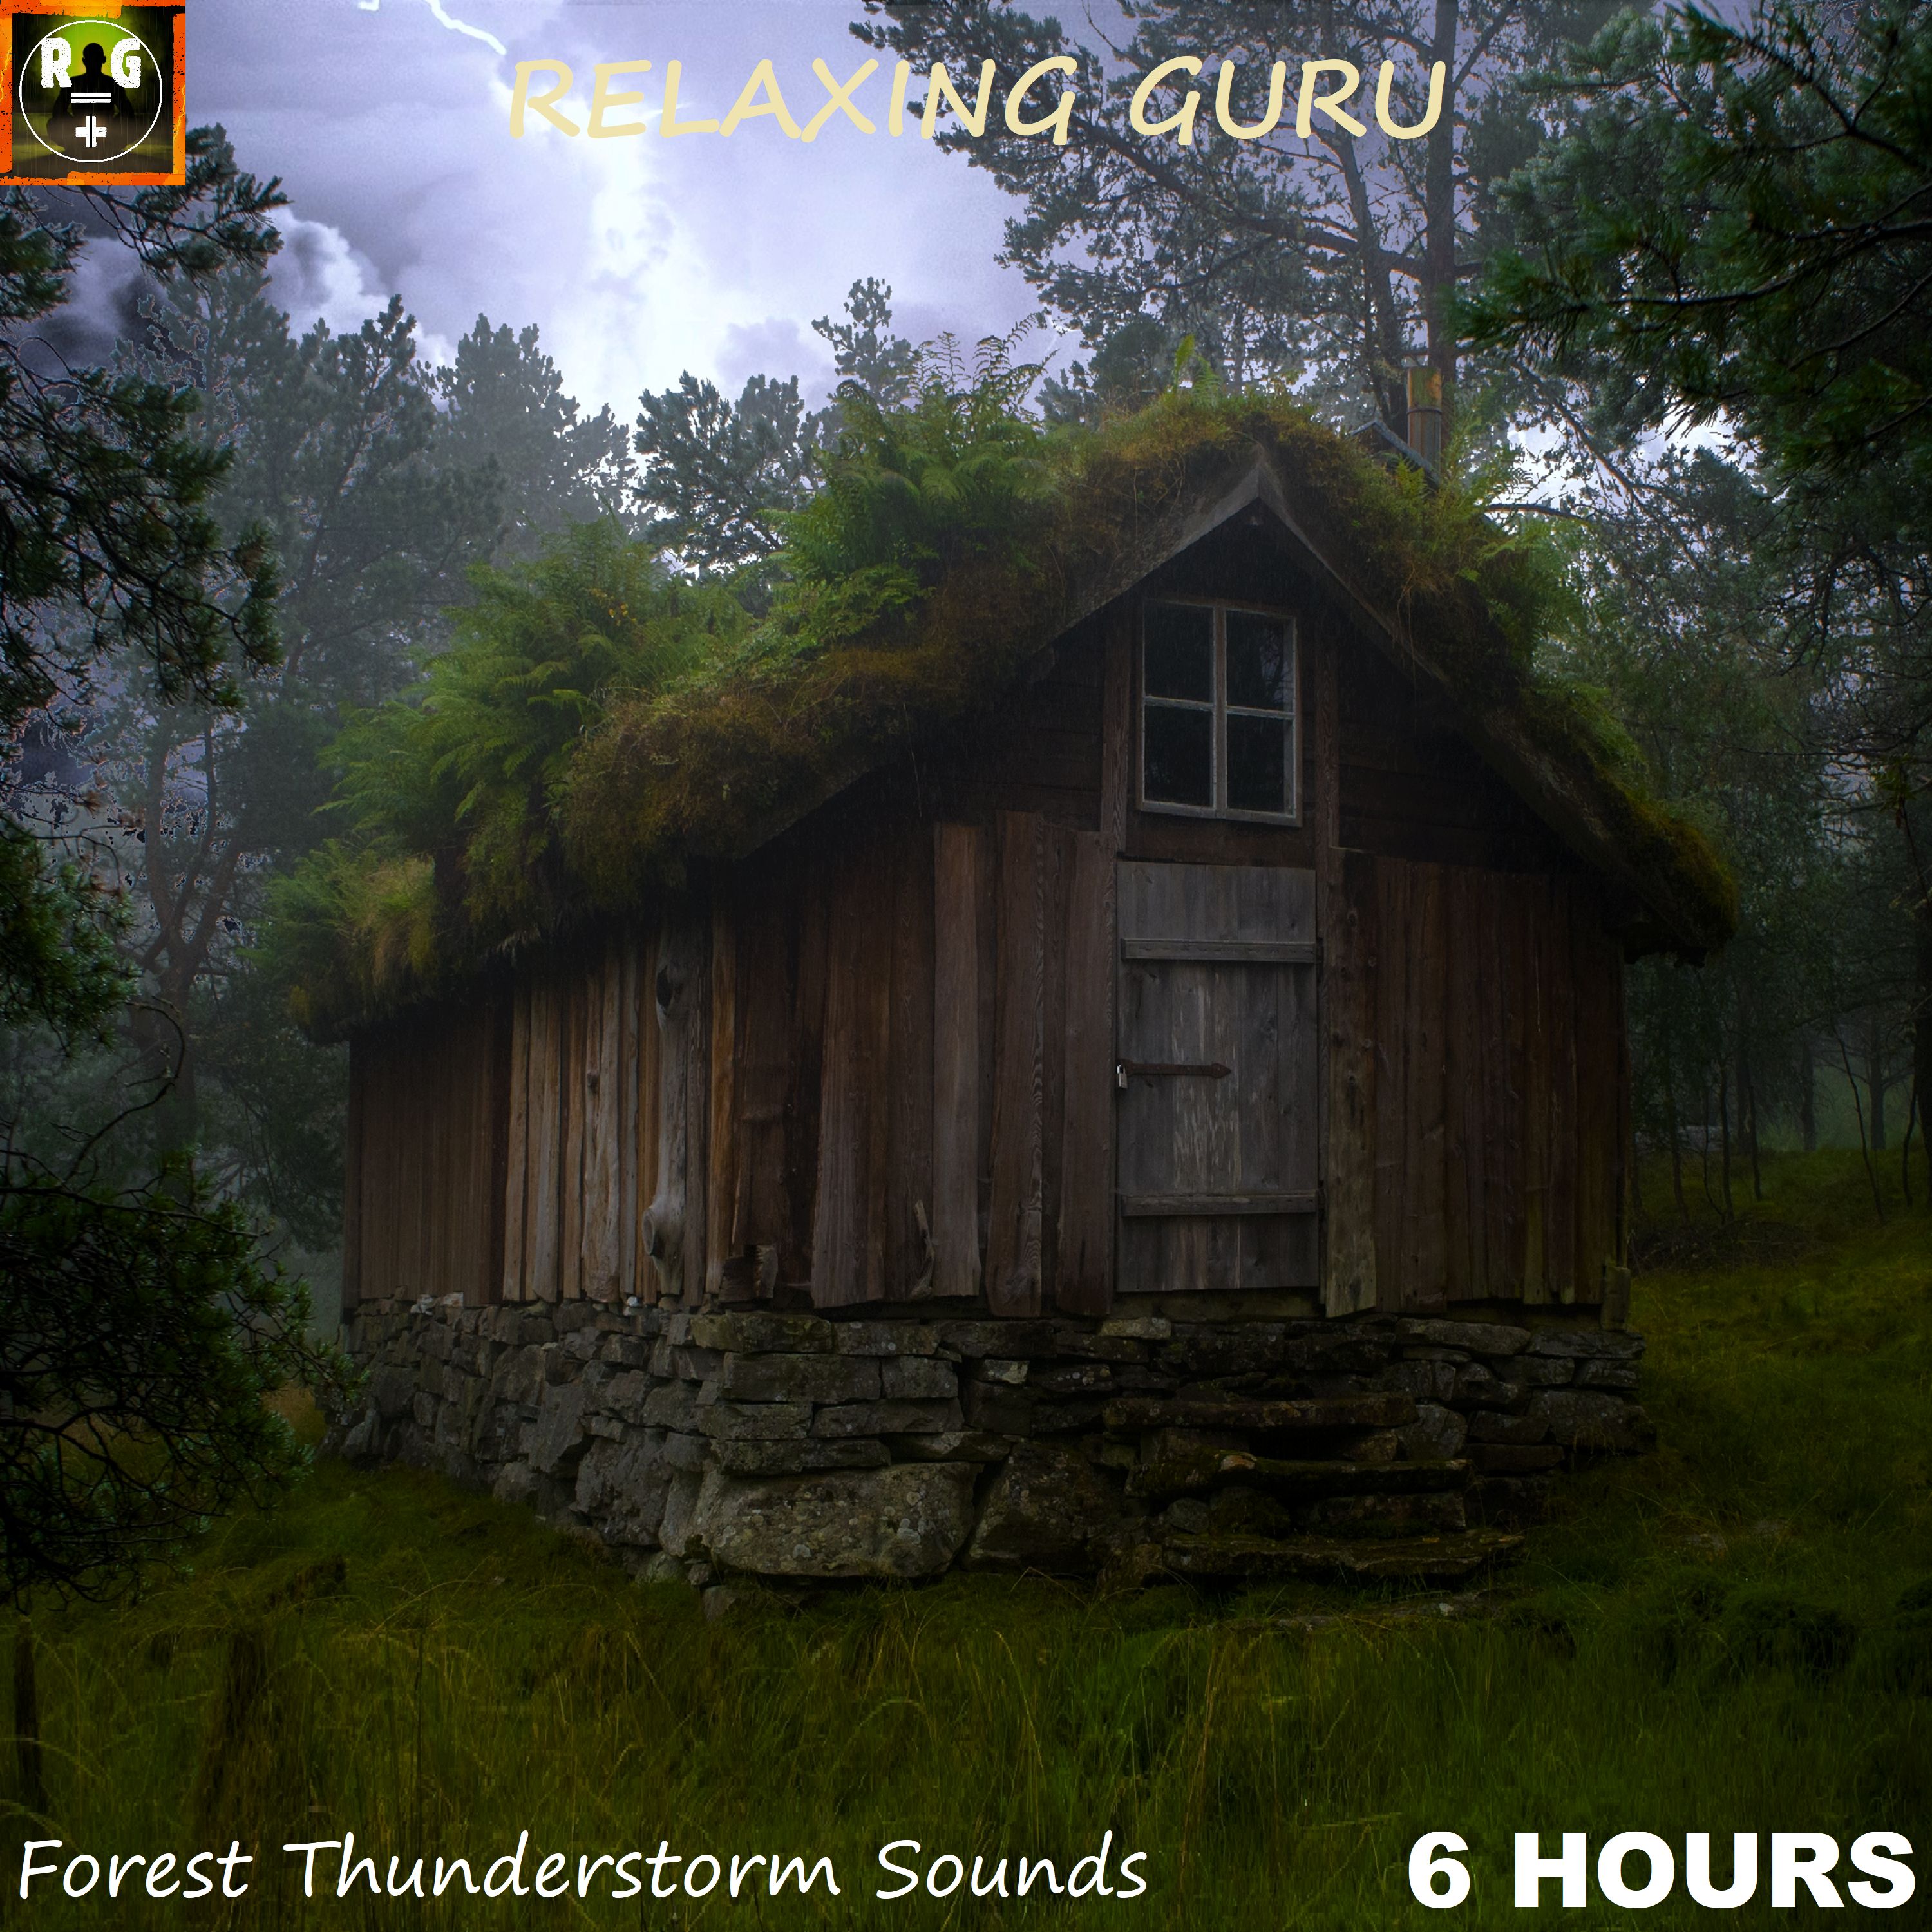 Download Relaxing Rain & Thunder on a Wooden Hut deep in the Forest - Thunderstorm Sounds for Sleep (6 HOURS)